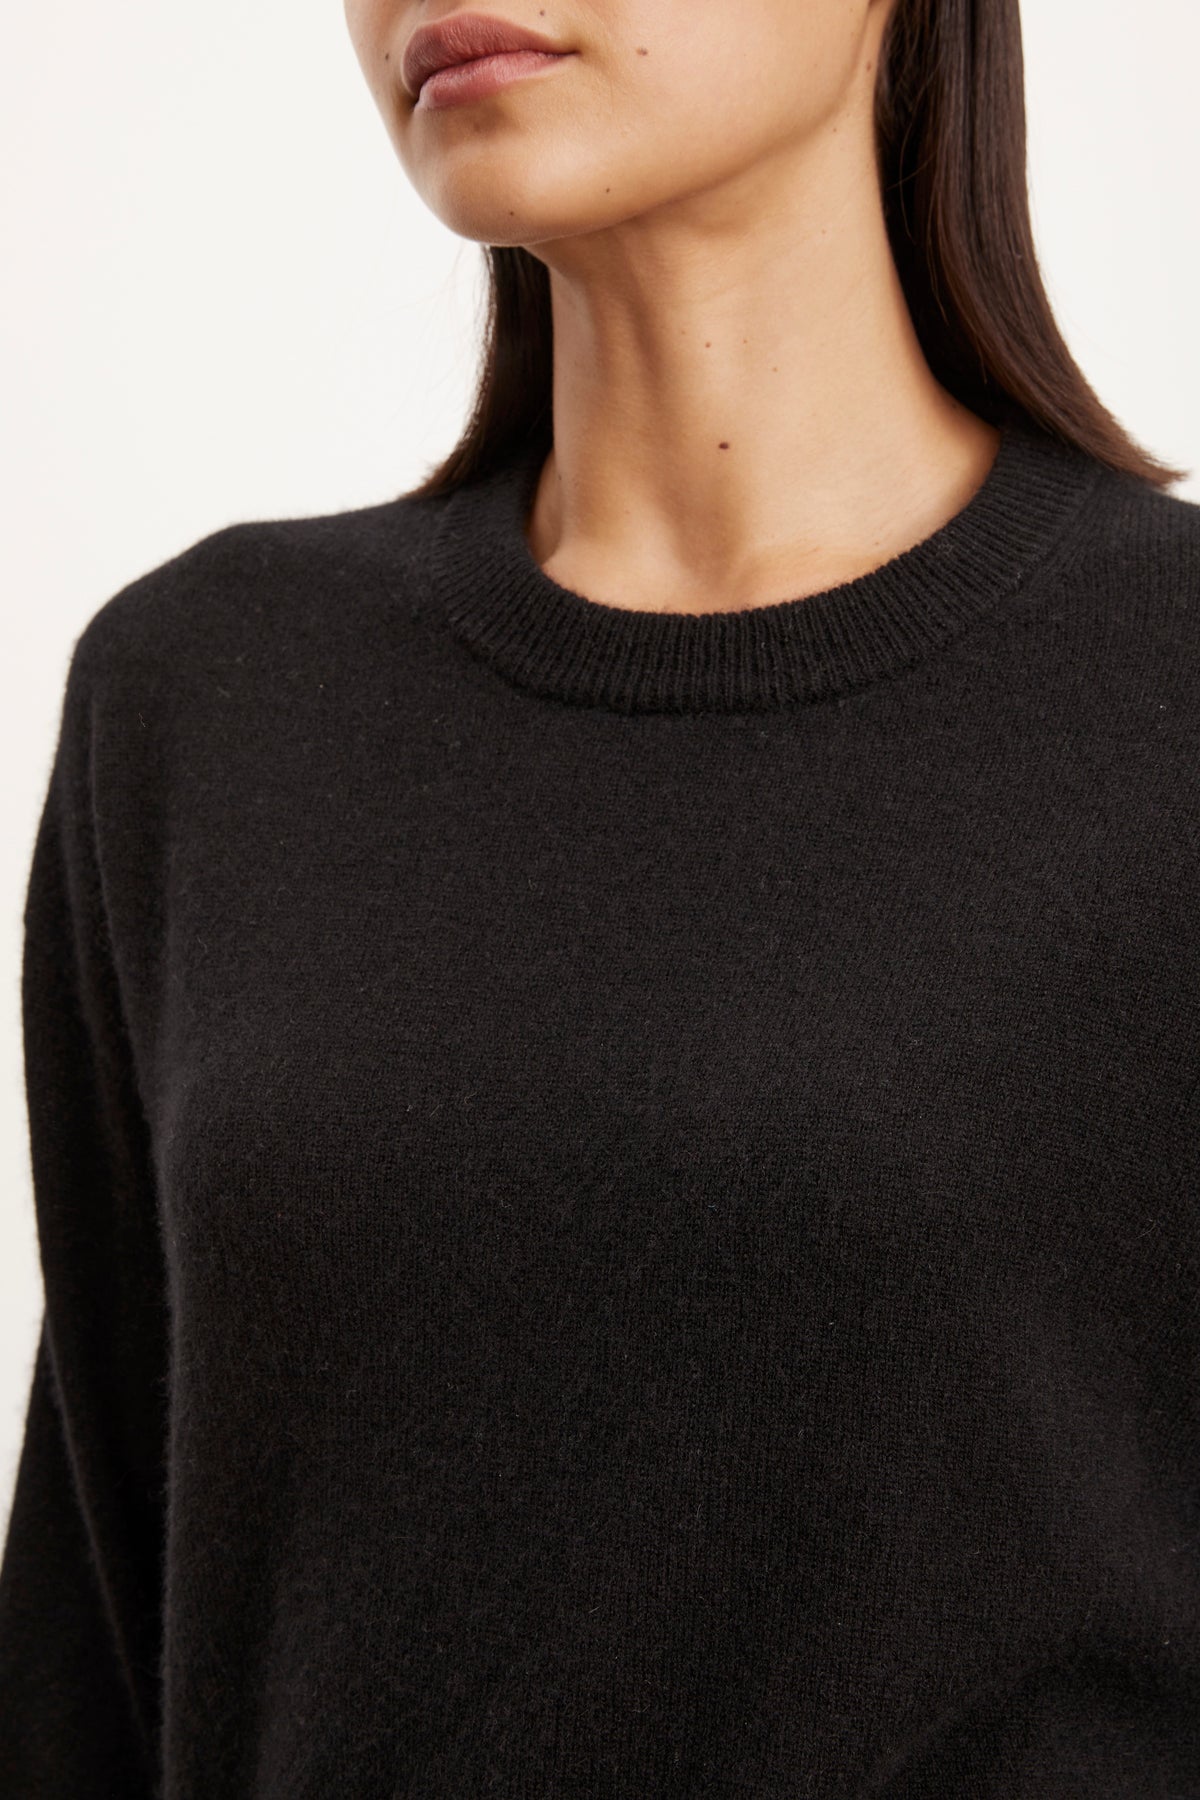   The BRYNNE cashmere crew neck sweater in black by Velvet by Graham & Spencer. 